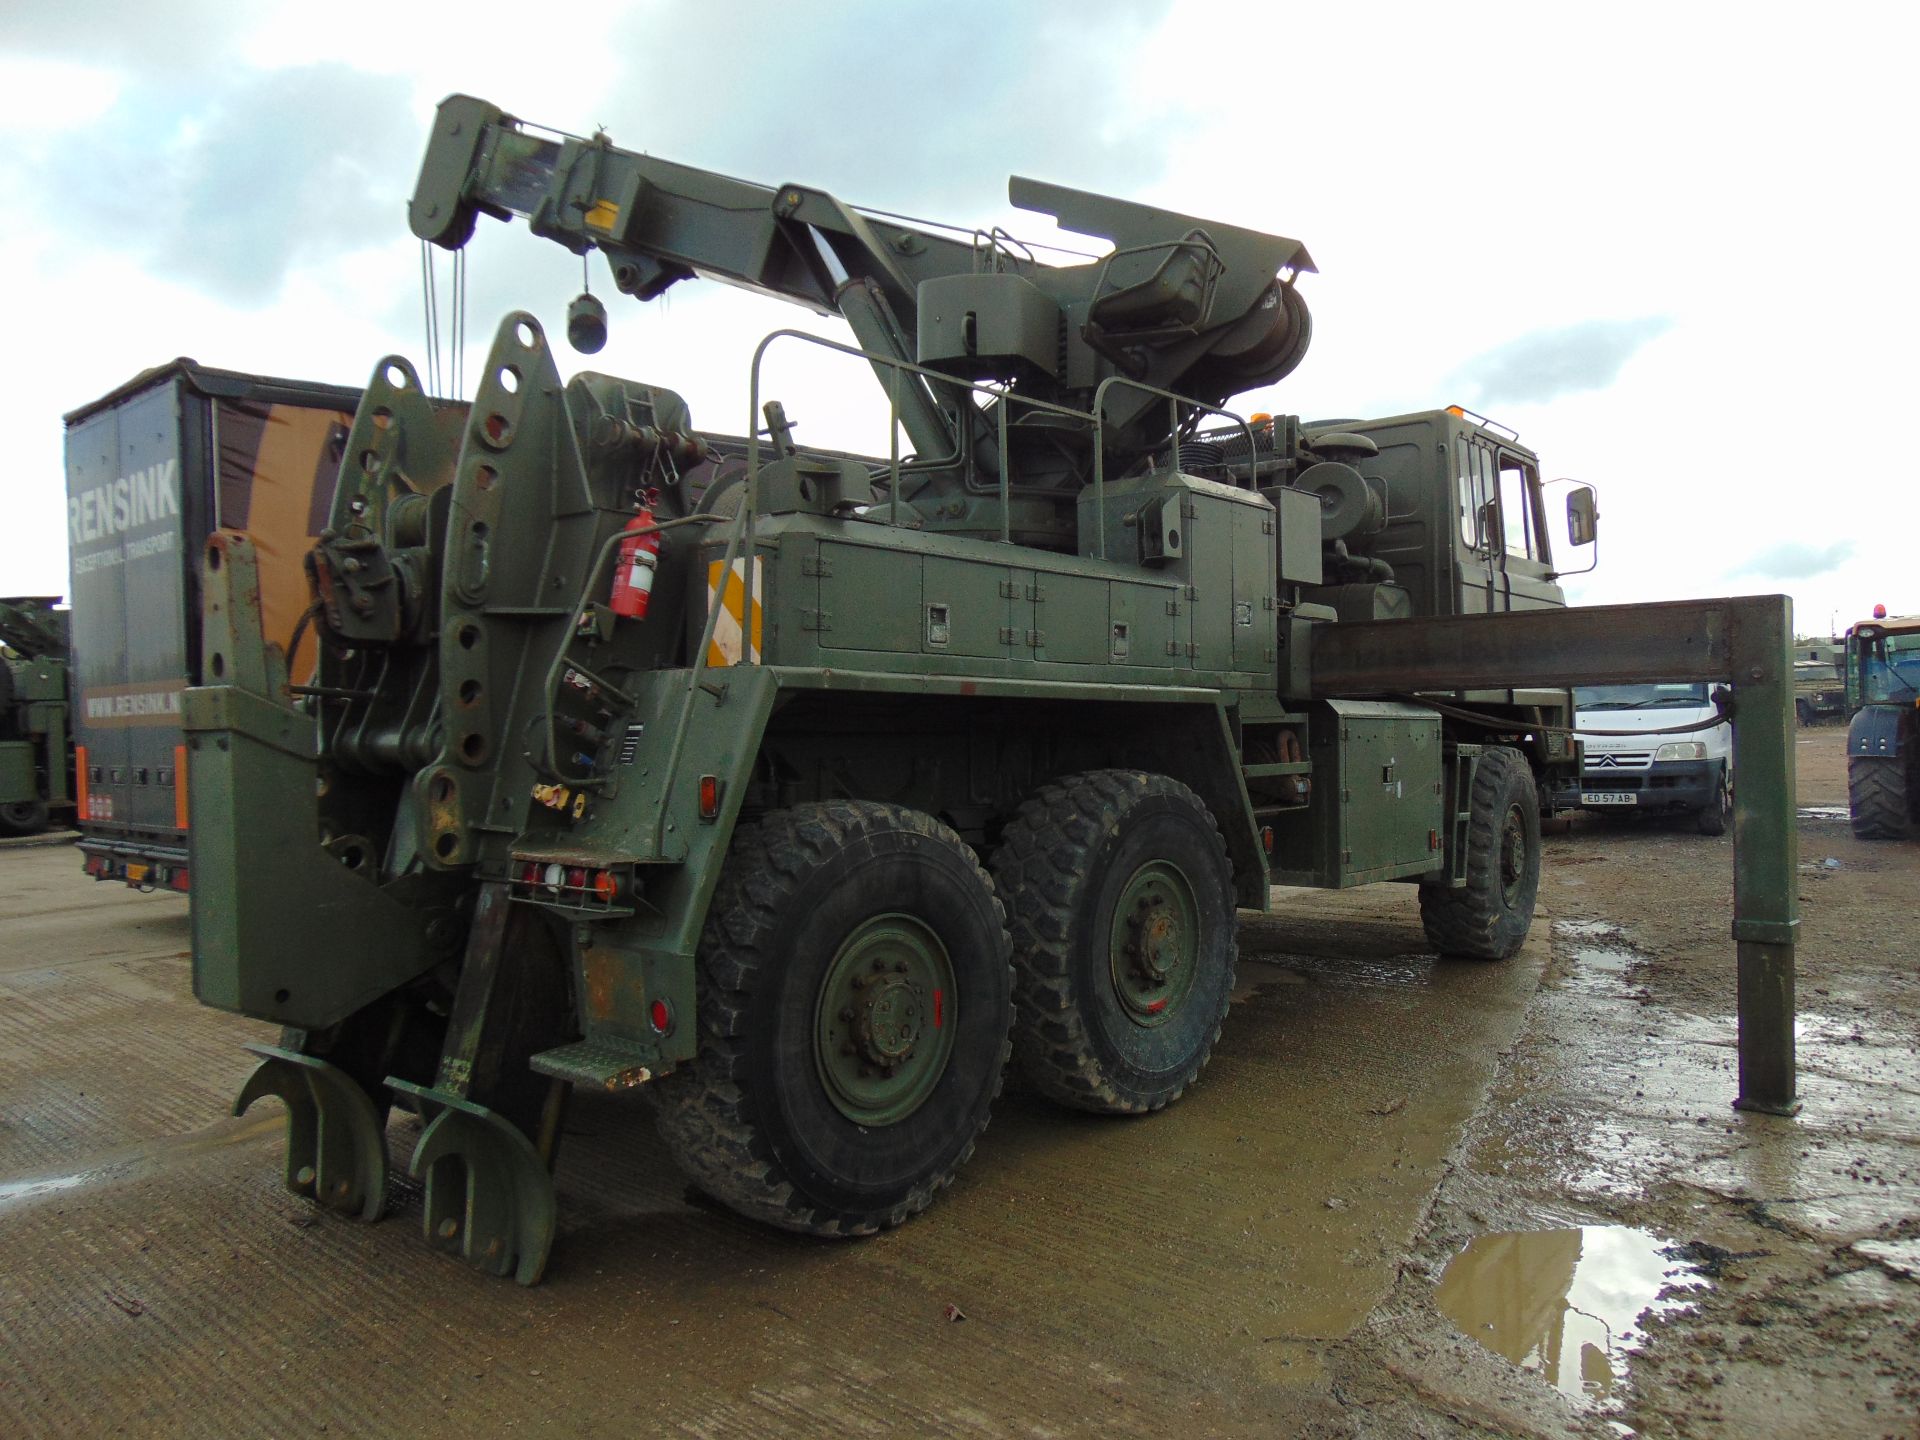 Foden 6x6 Recovery Vehicle which is Complete with Remotes and EKA Recovery Tools - Image 5 of 31